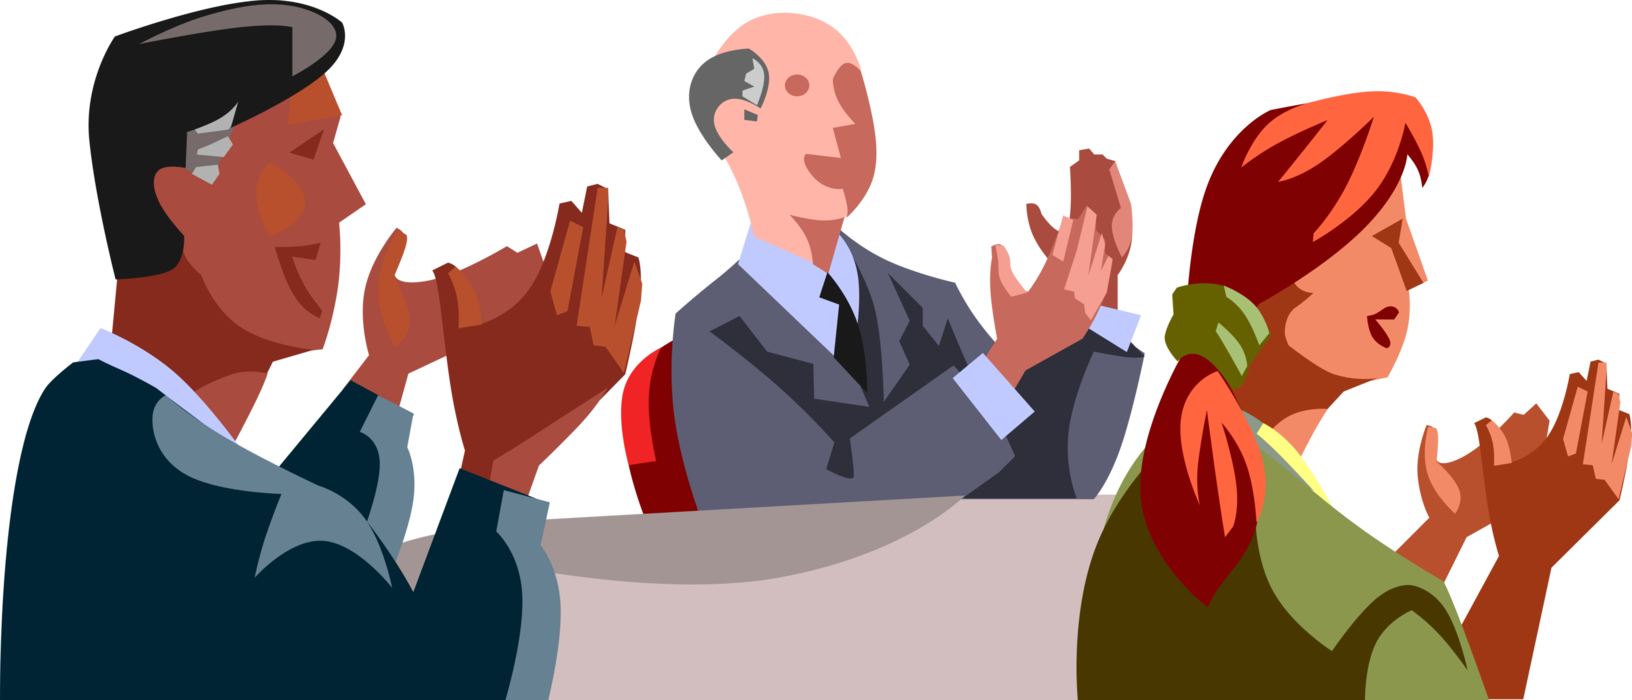 Vector Illustration of Business Colleagues Applaud in Boardroom Meeting with Clapping Hands